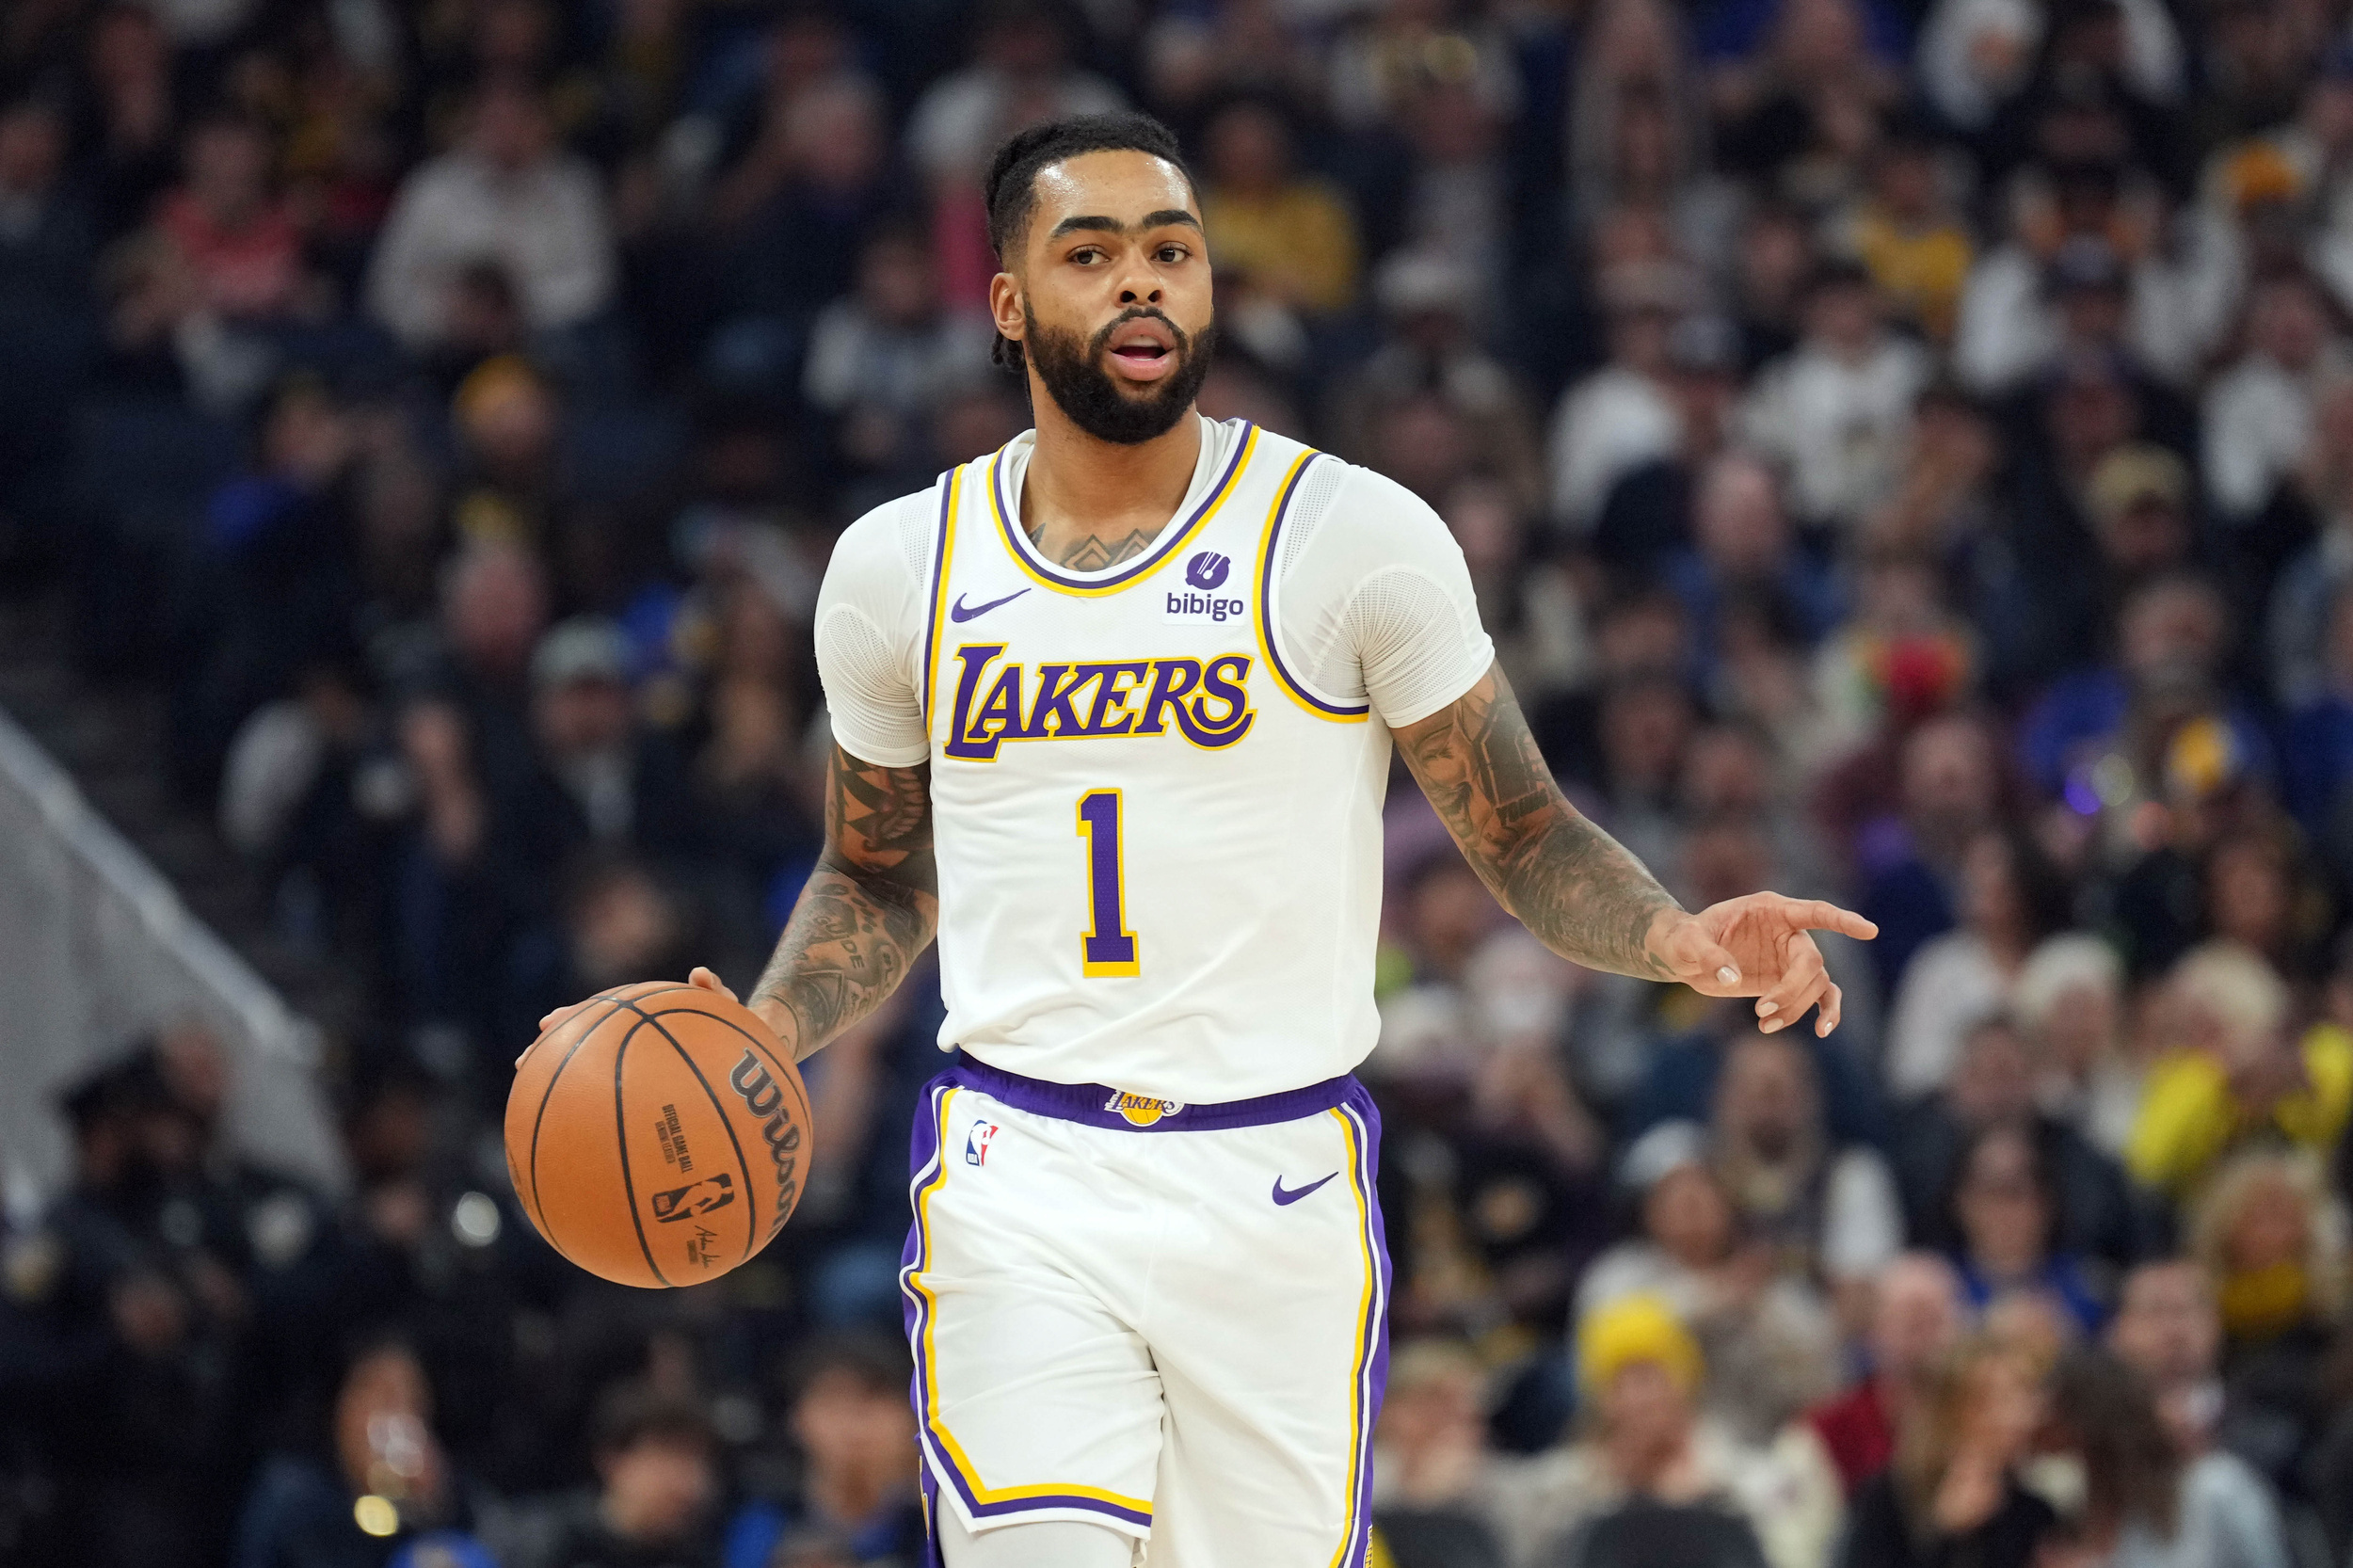 lakers guard d'angelo russell gets candid on impending free agency